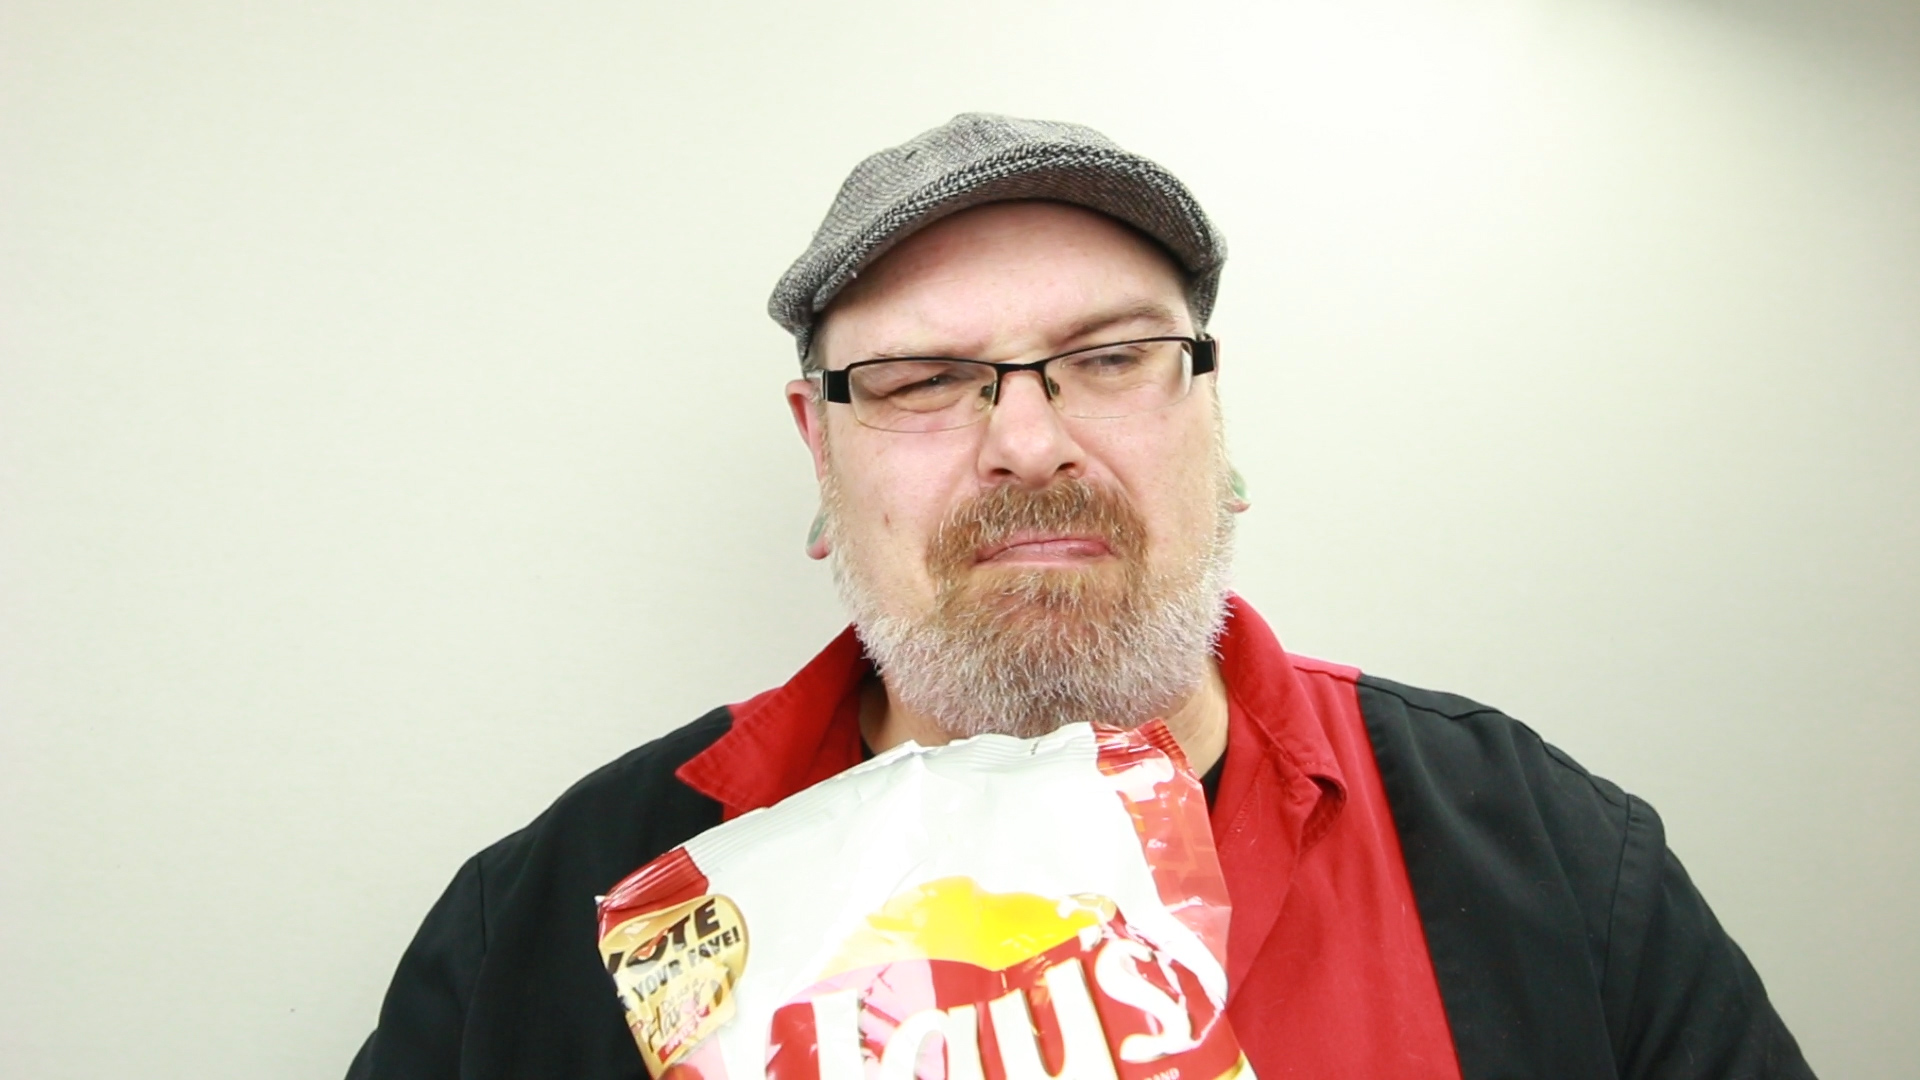 Snacktaku Judges Lay’s 2017 Chip Flavour Contest Finalists